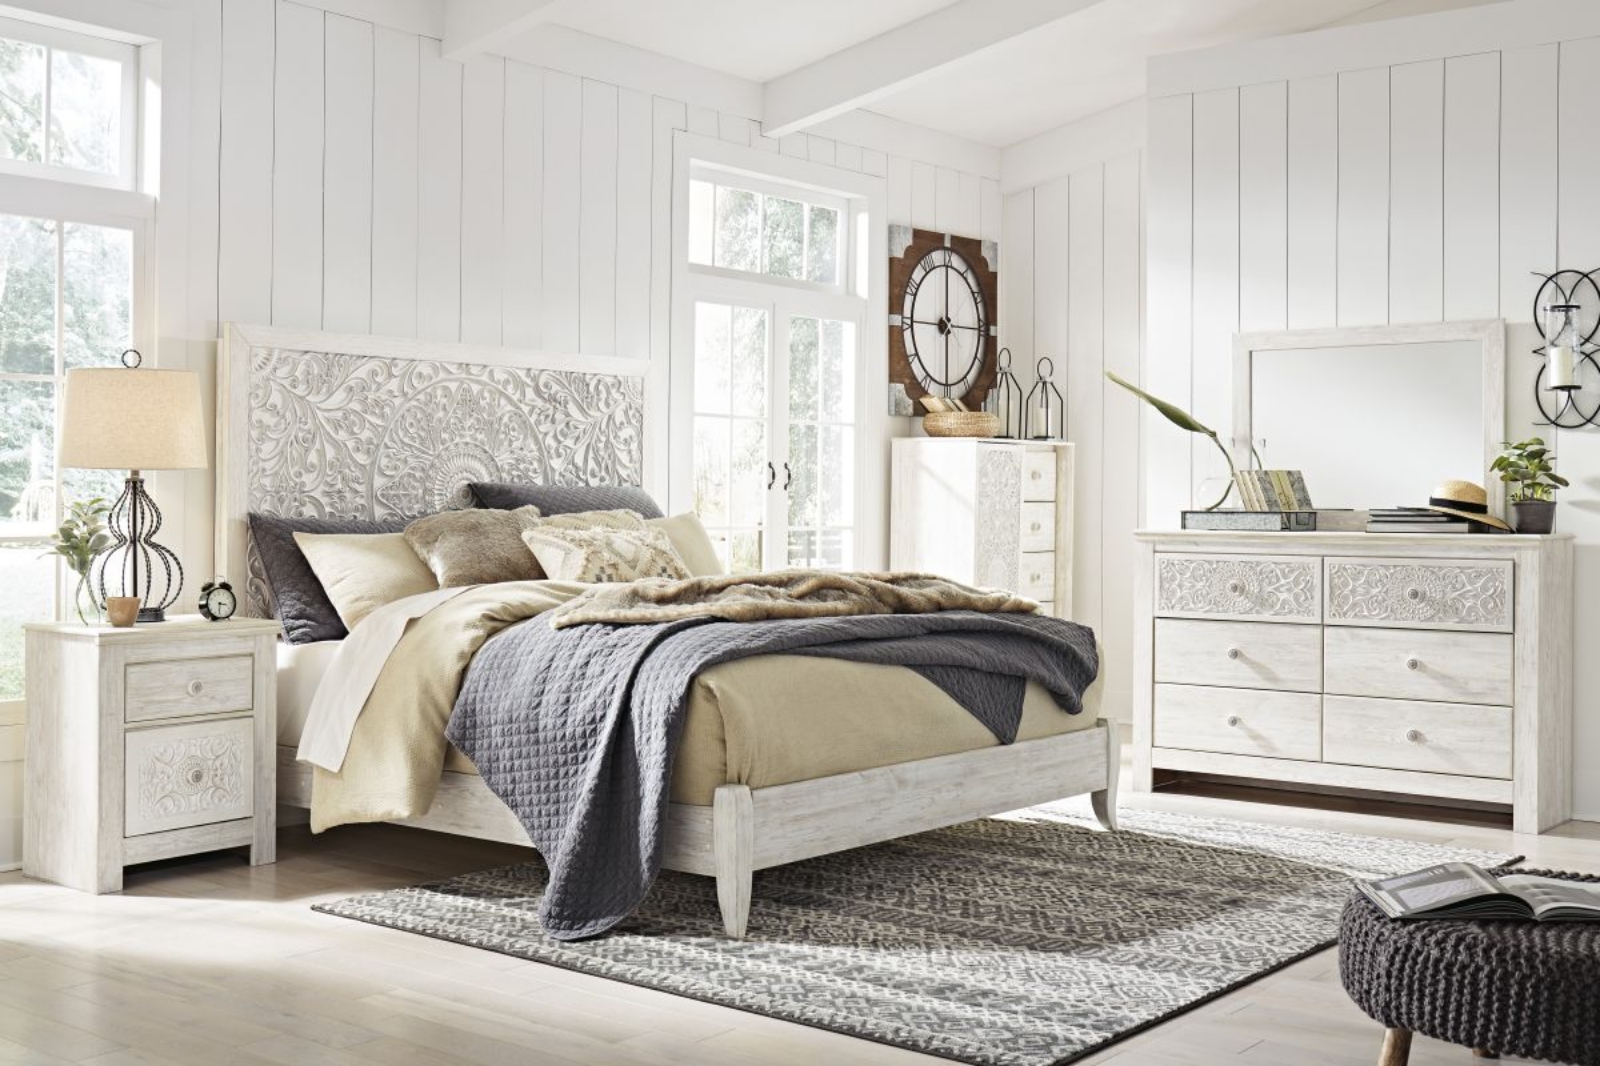 Picture of Paxberry 5 Piece Queen Bedroom Group